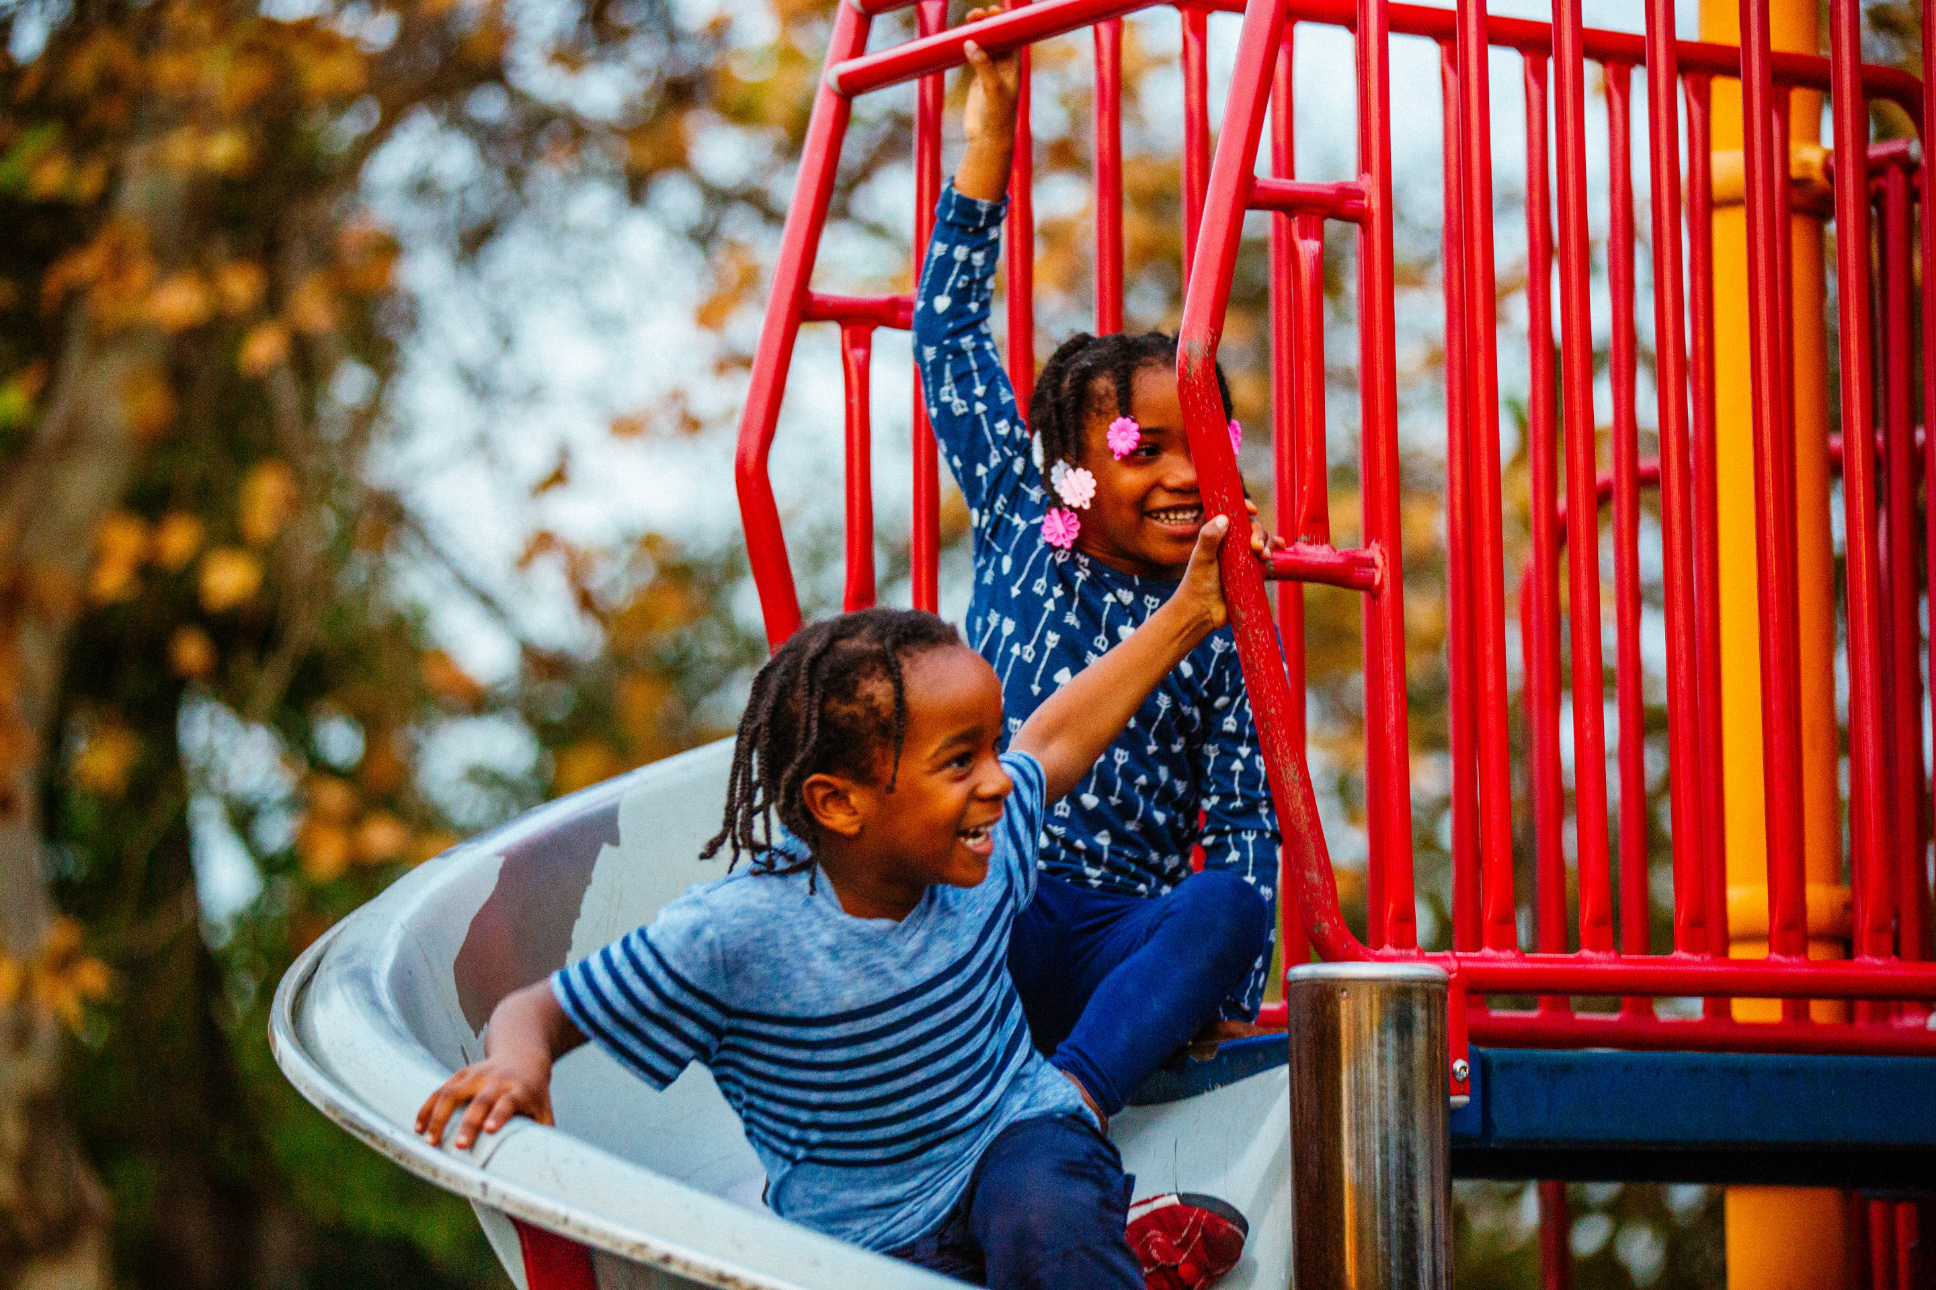 Denise Wilson's 4-year-old twins play at Hemmingway Park in Compton. (Chava Sanchez/LAist)